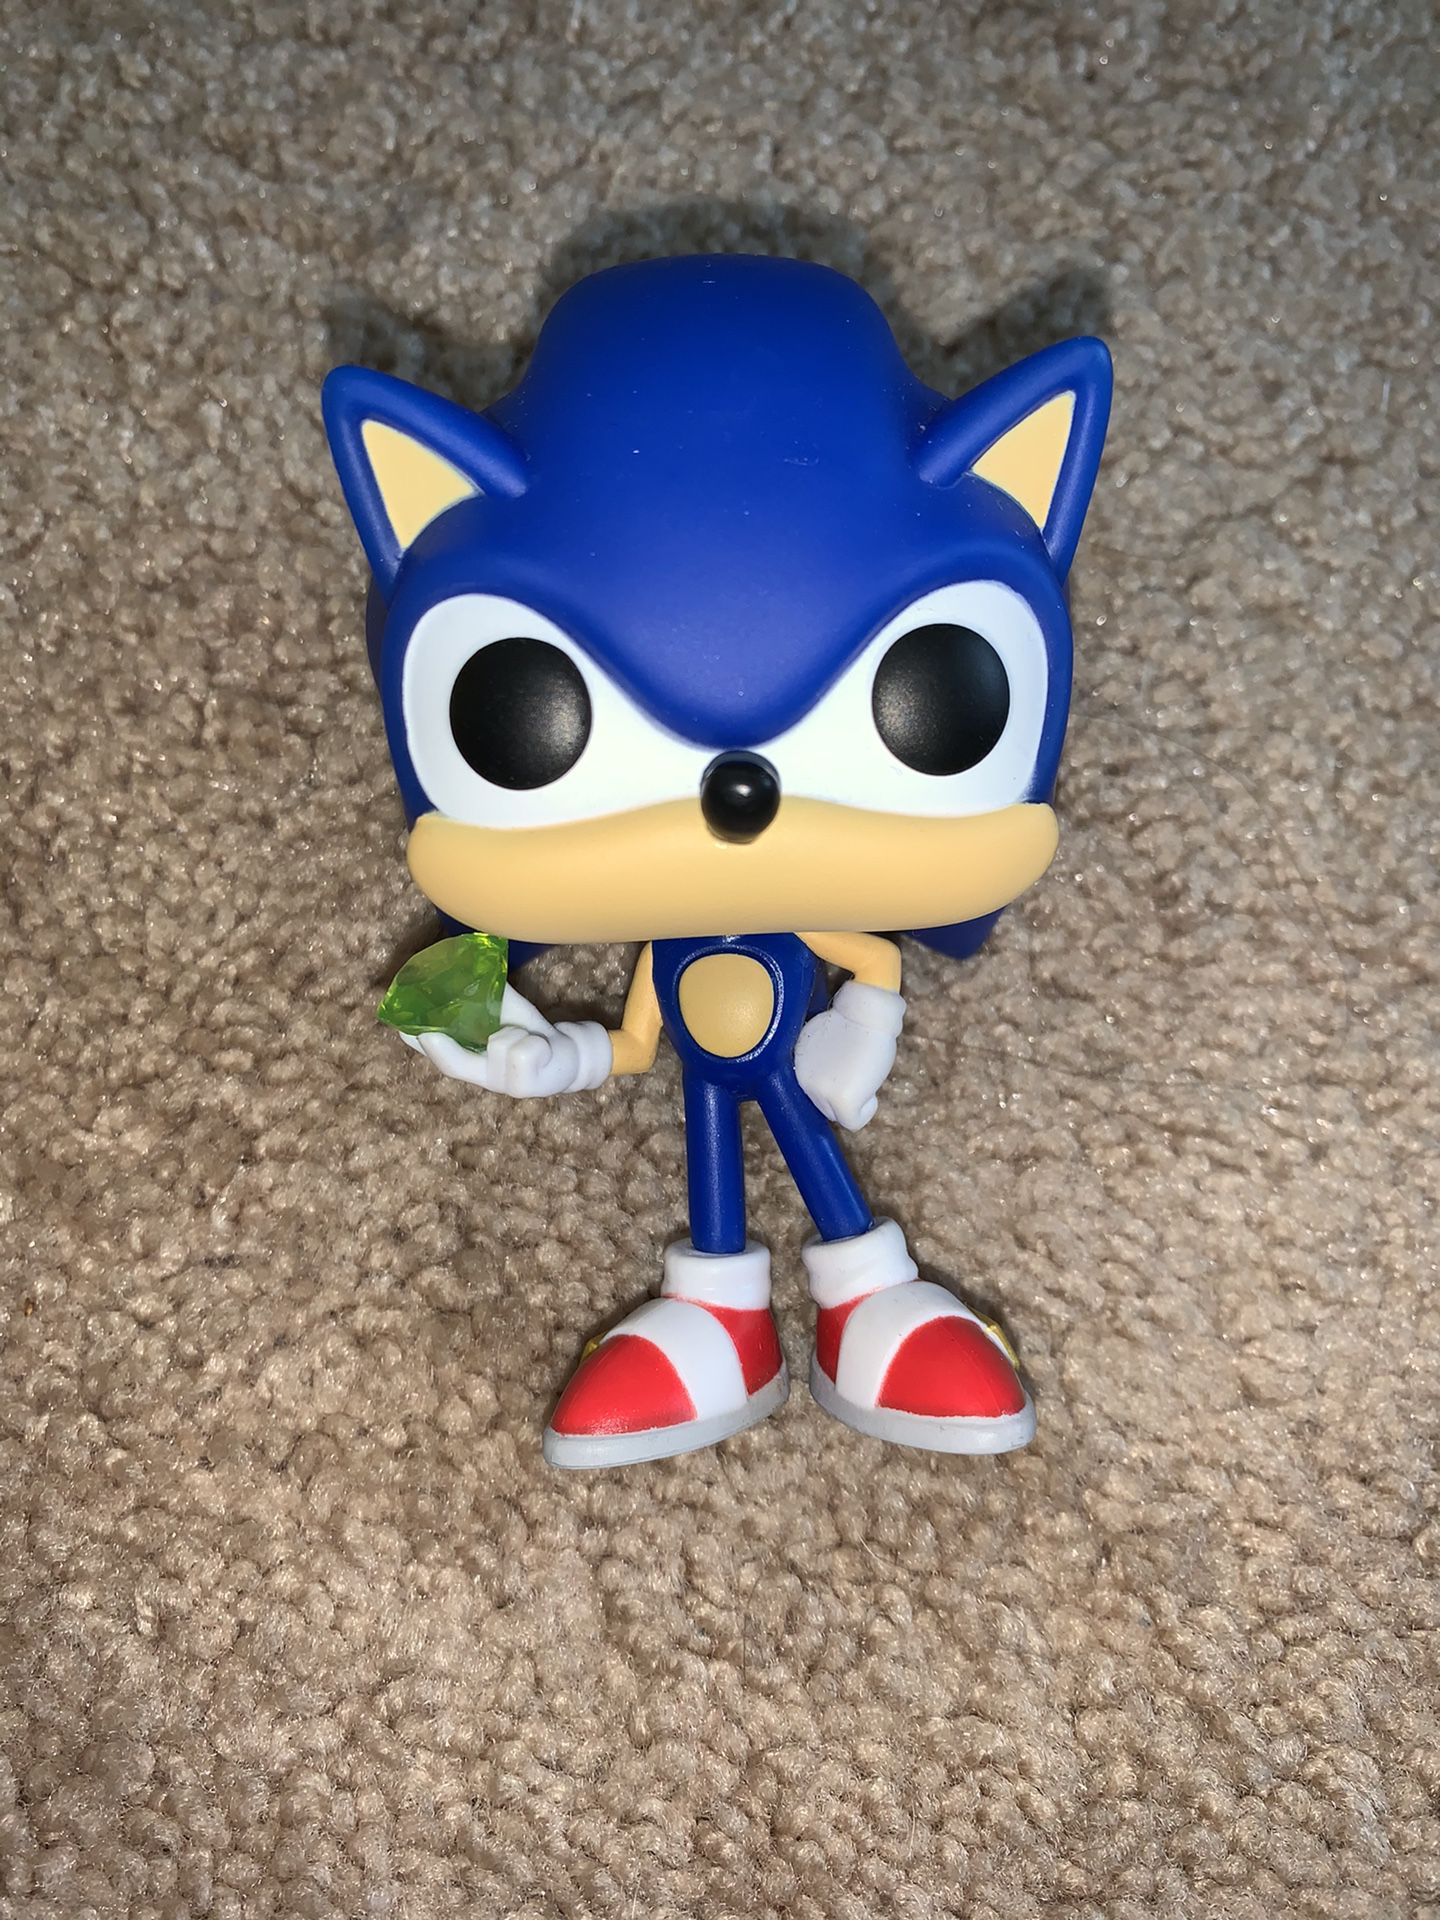 SONIC WITH EMERALD - Pop! Collectible